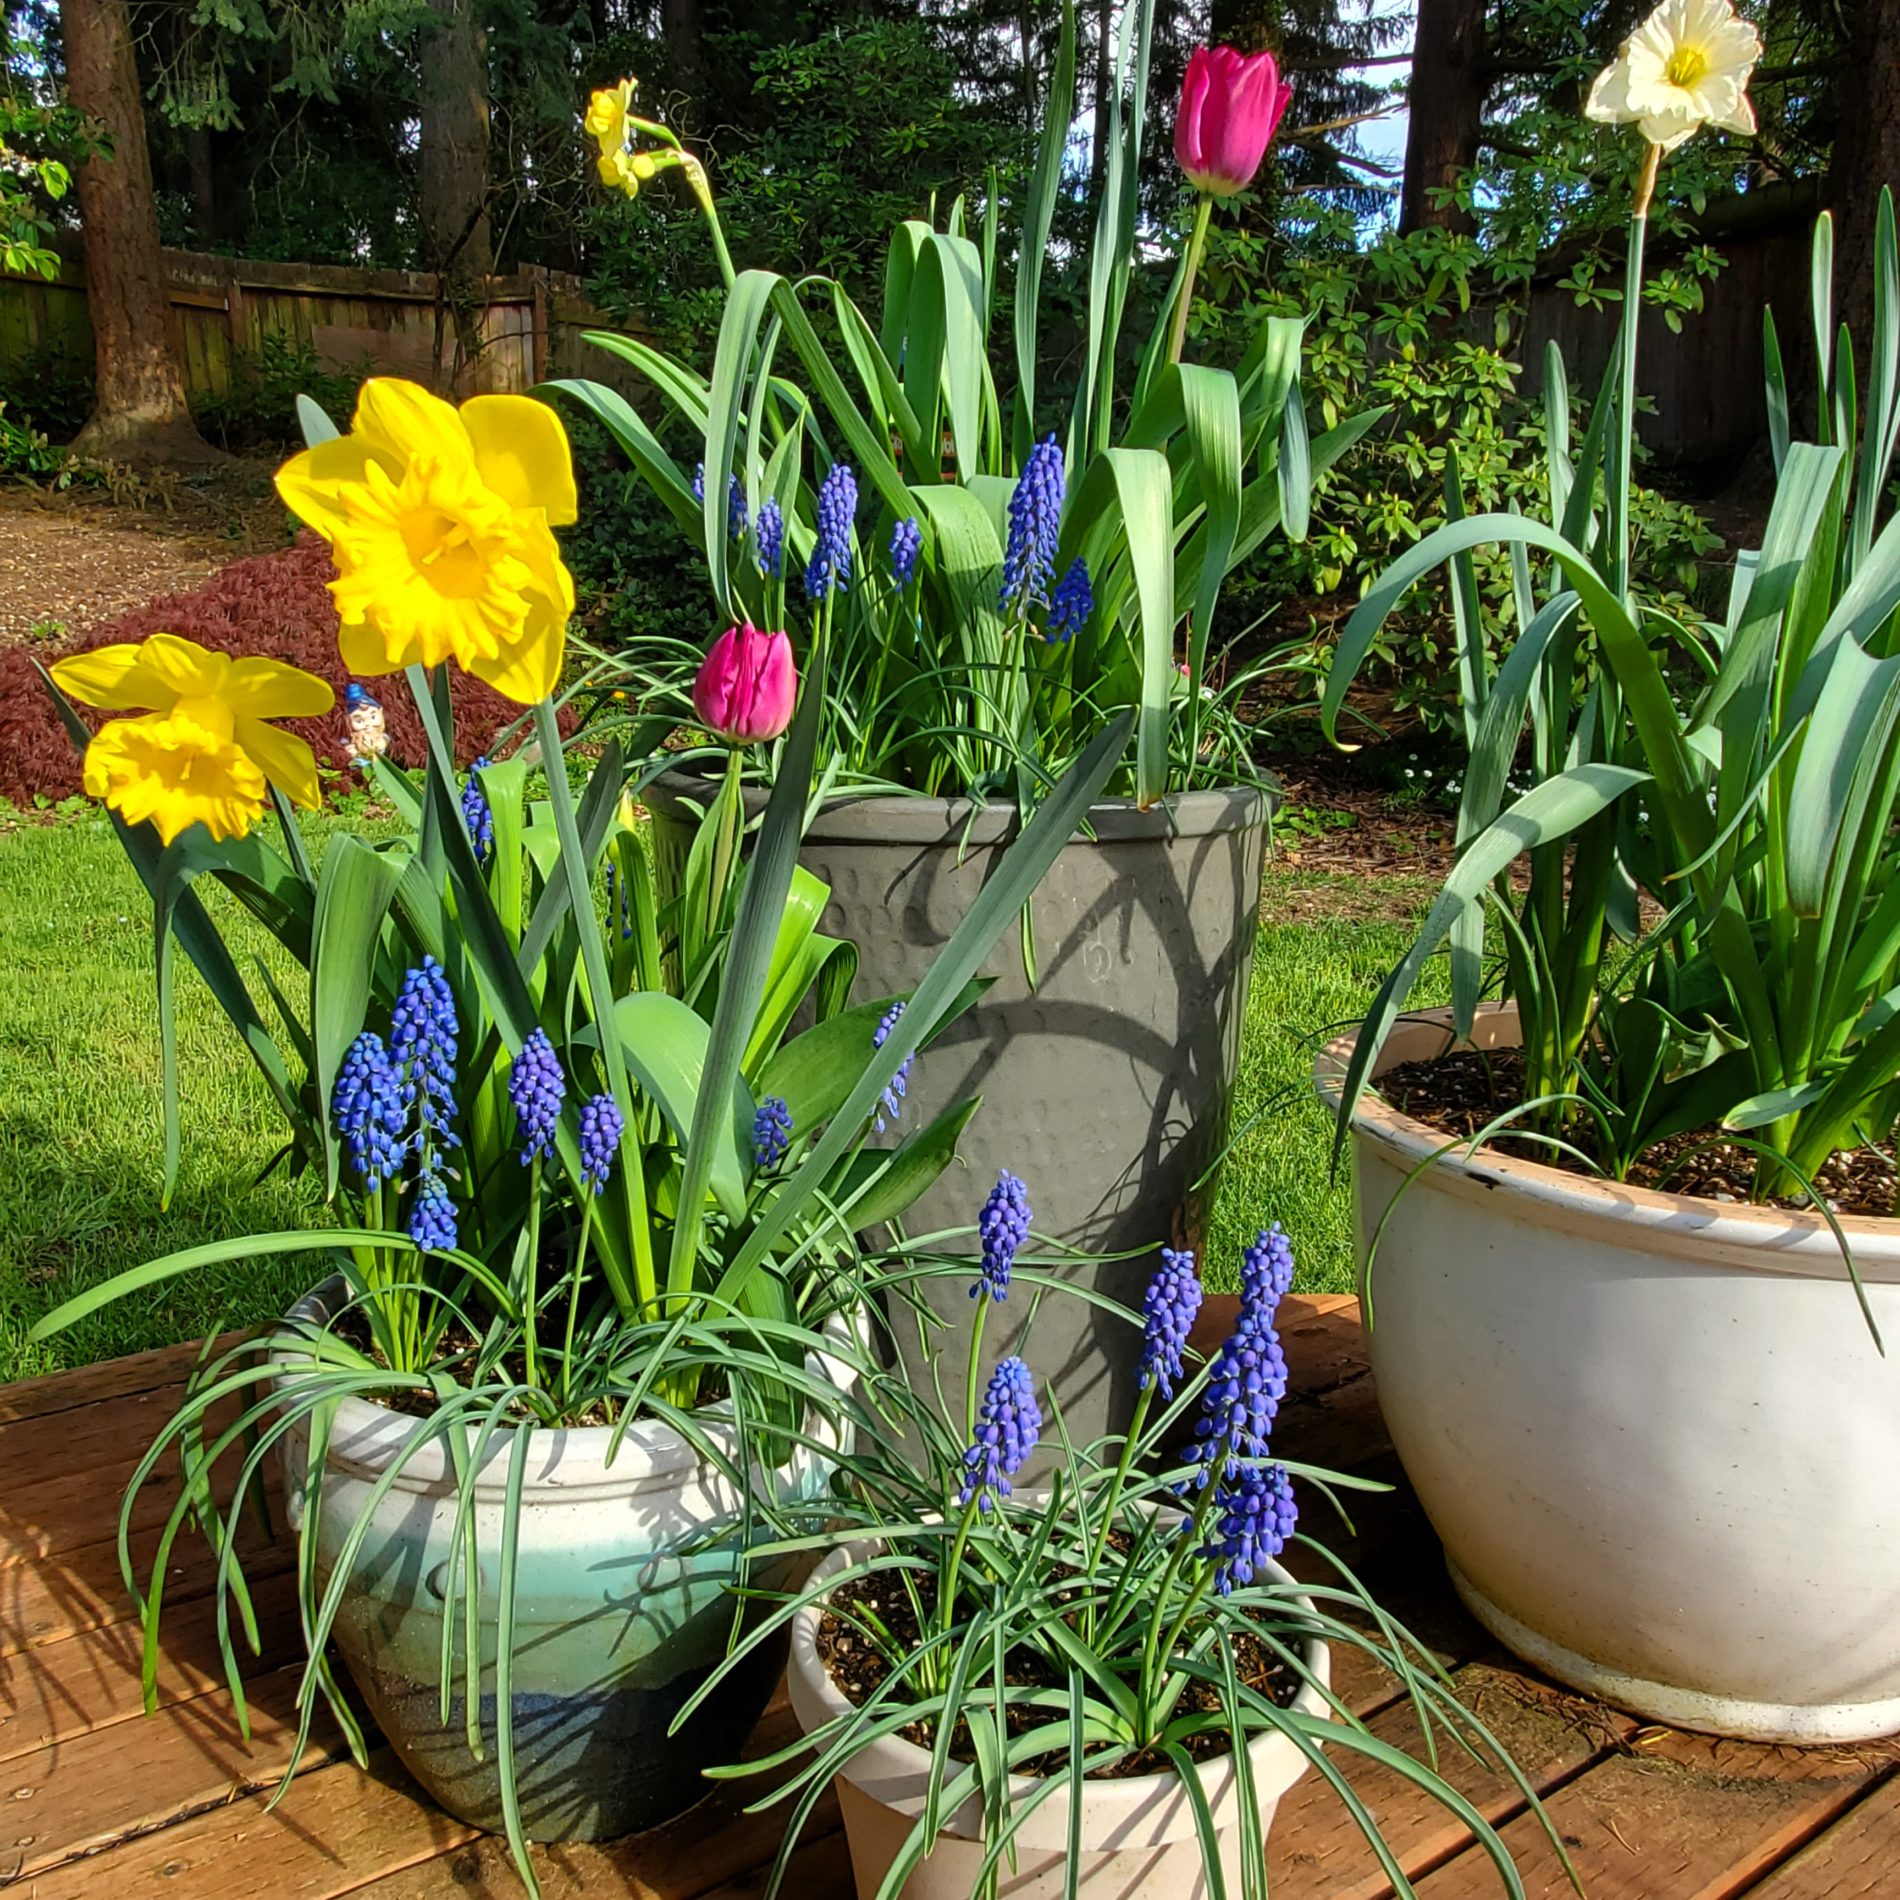 Potted daffodils, hyacinth, and tulips on a deck at home.